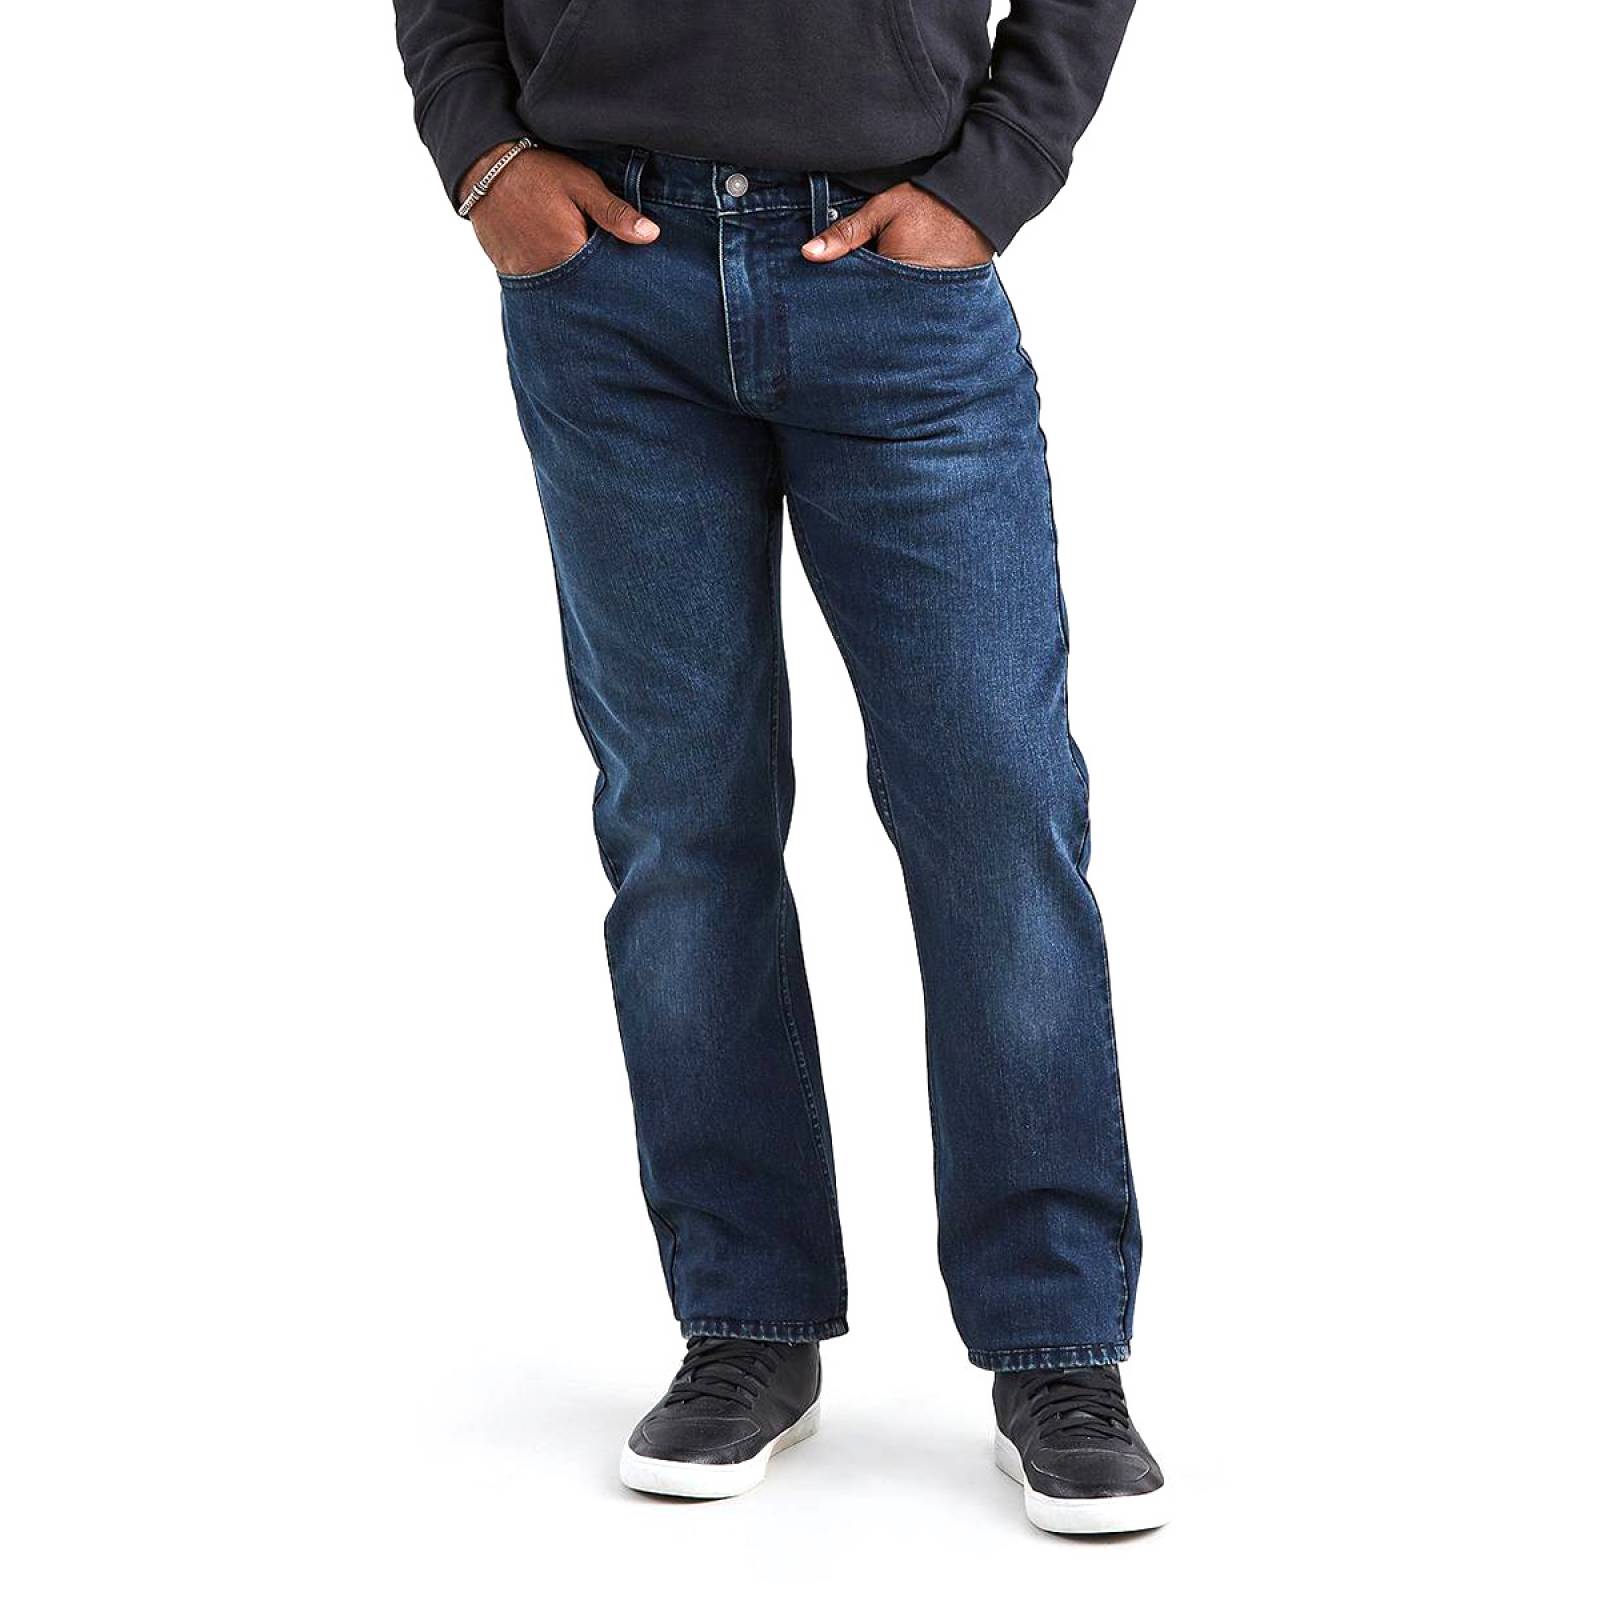 Jeans 559 Relaxed Aight para Caballero